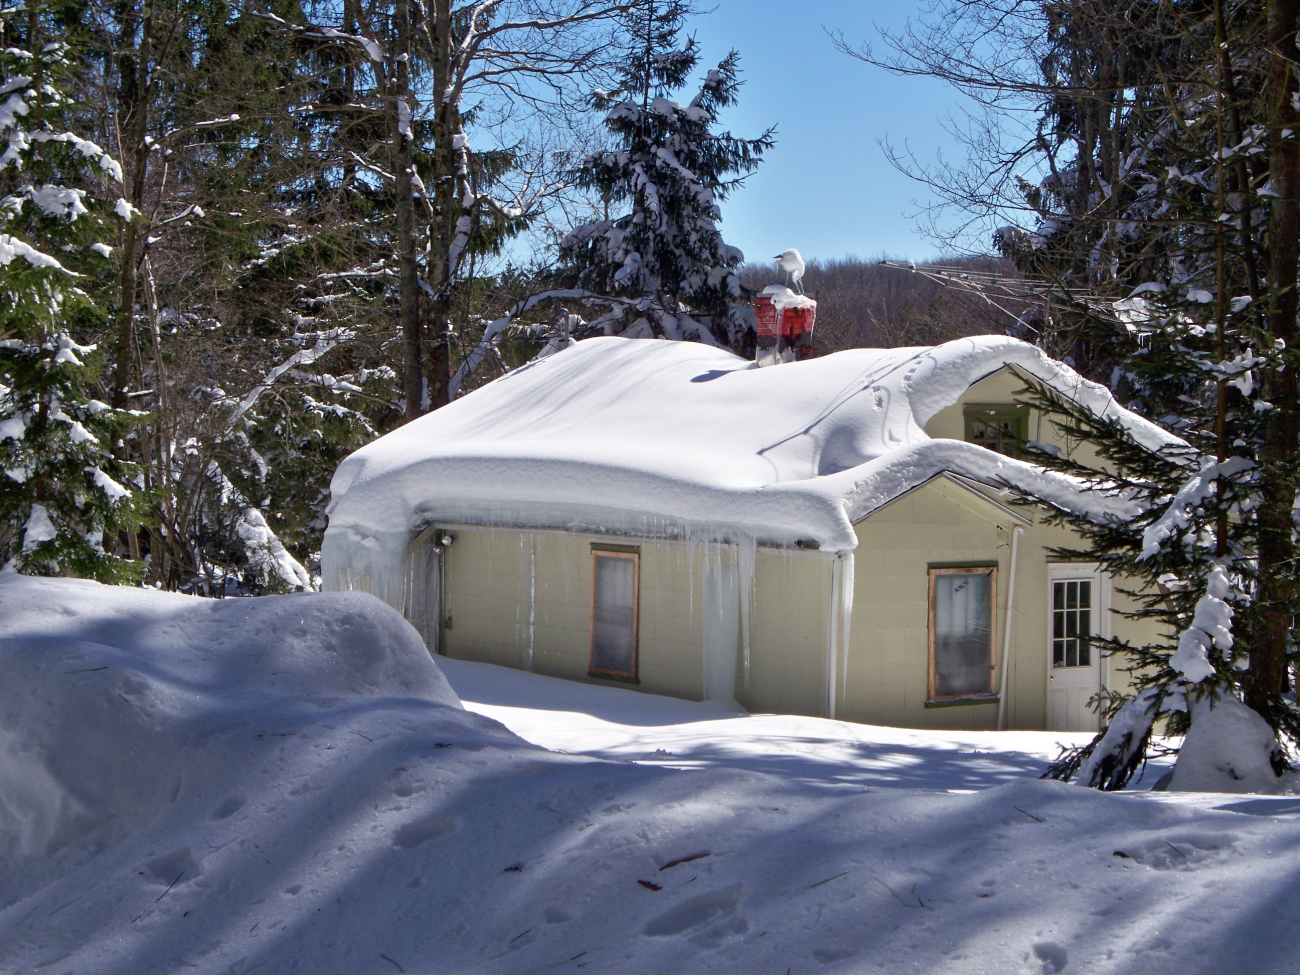 Following record totals of snow in February 2010, a trip to the West Virginiamountains